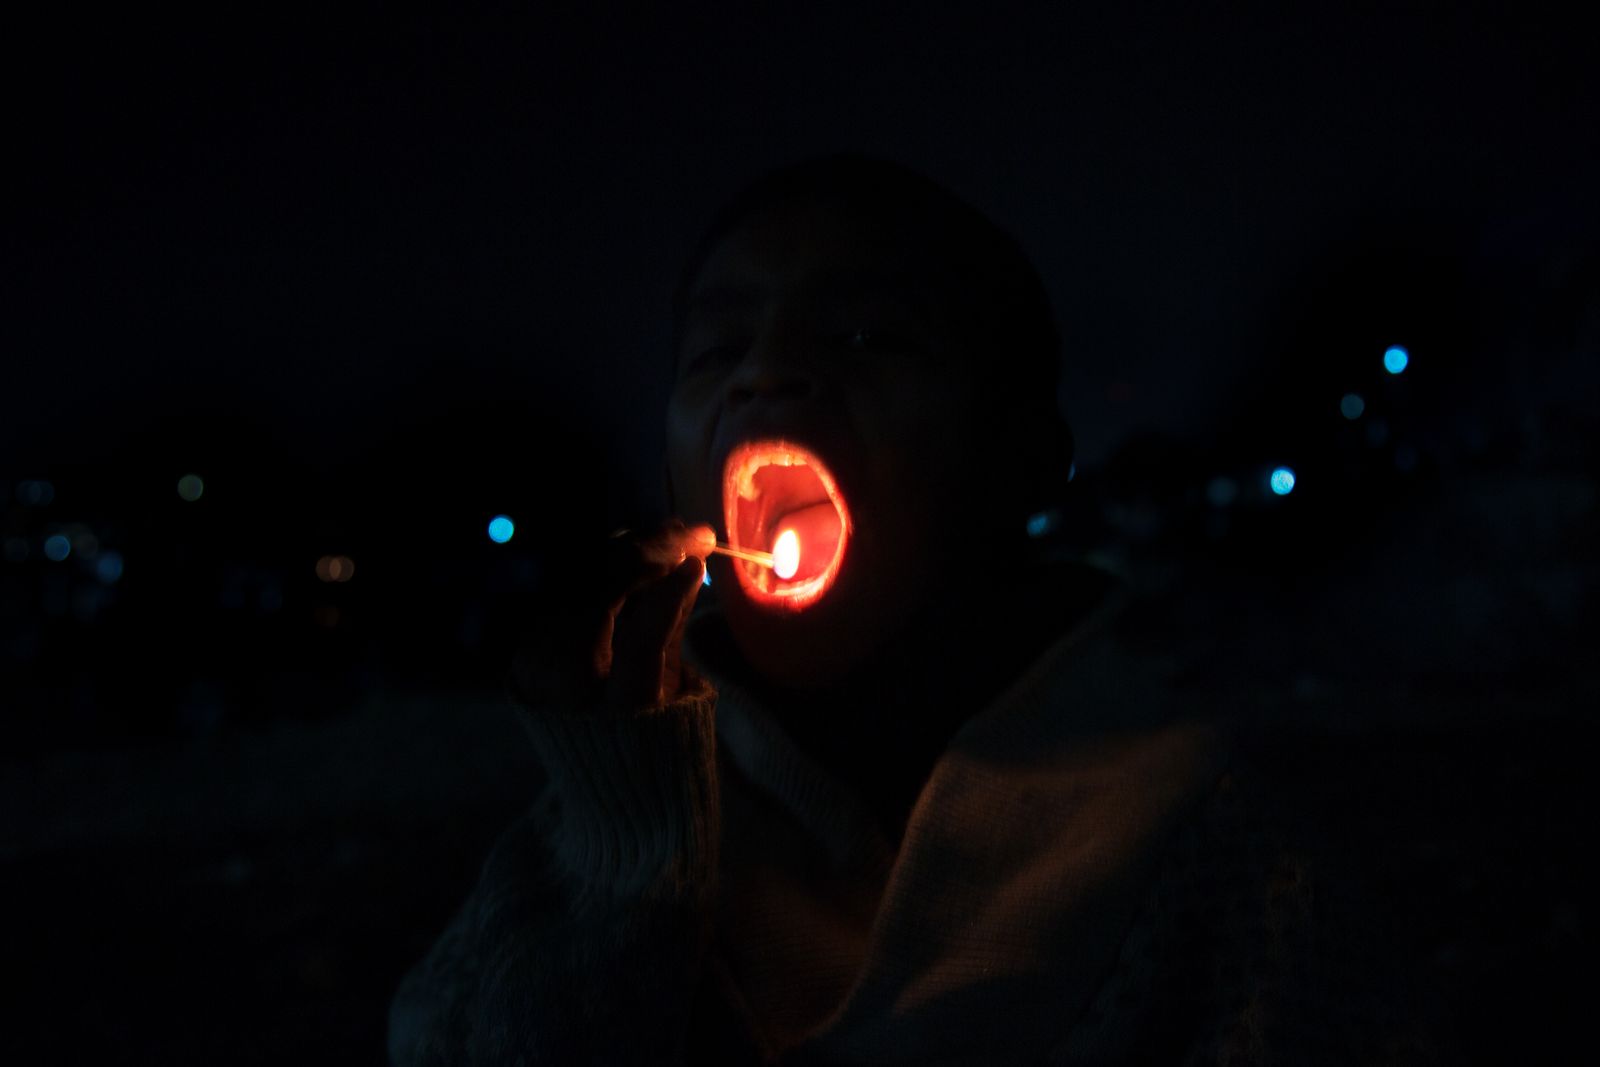 © Anupam Diwan - Image from the FIREFLIES photography project